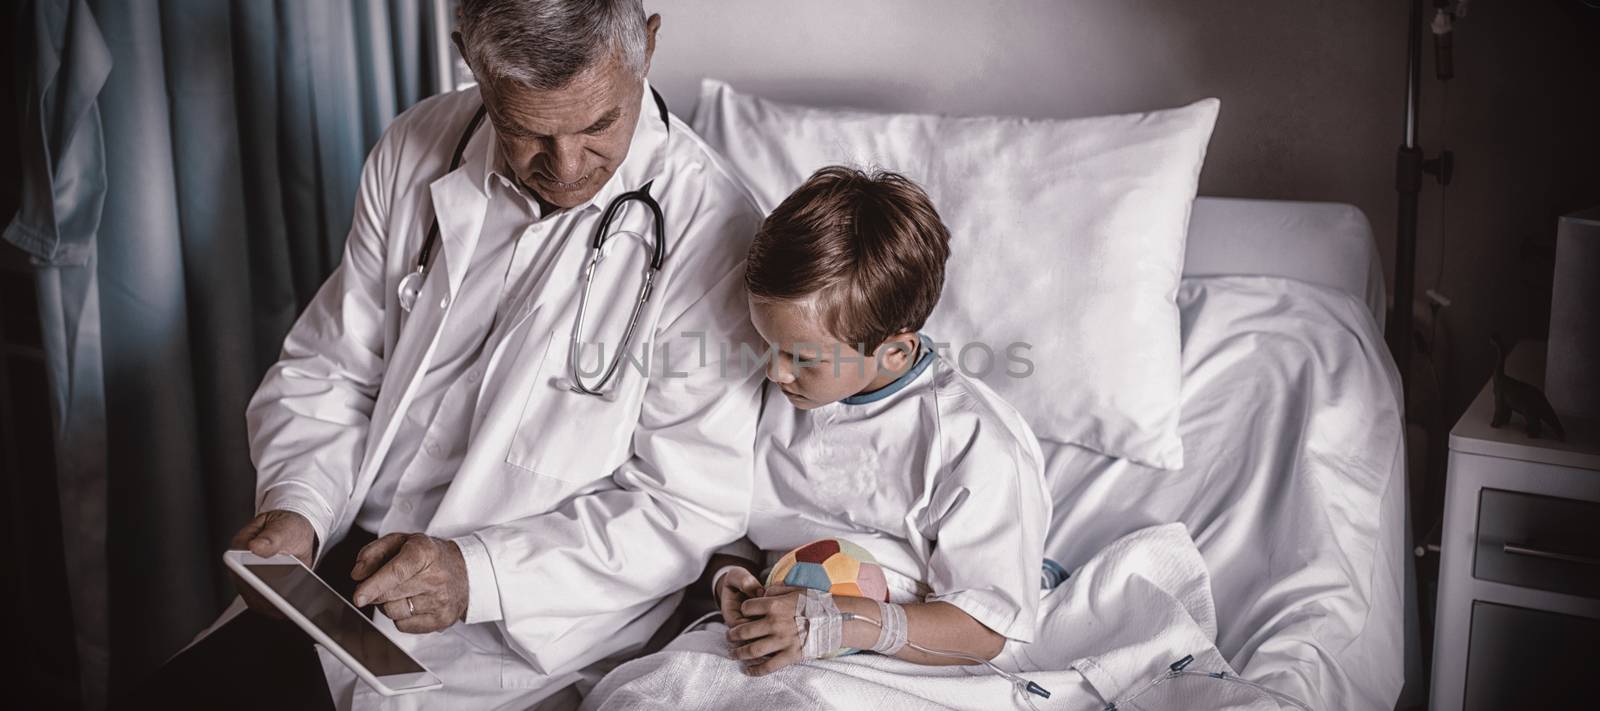 Doctor showing medical report in digital tablet to patient by Wavebreakmedia